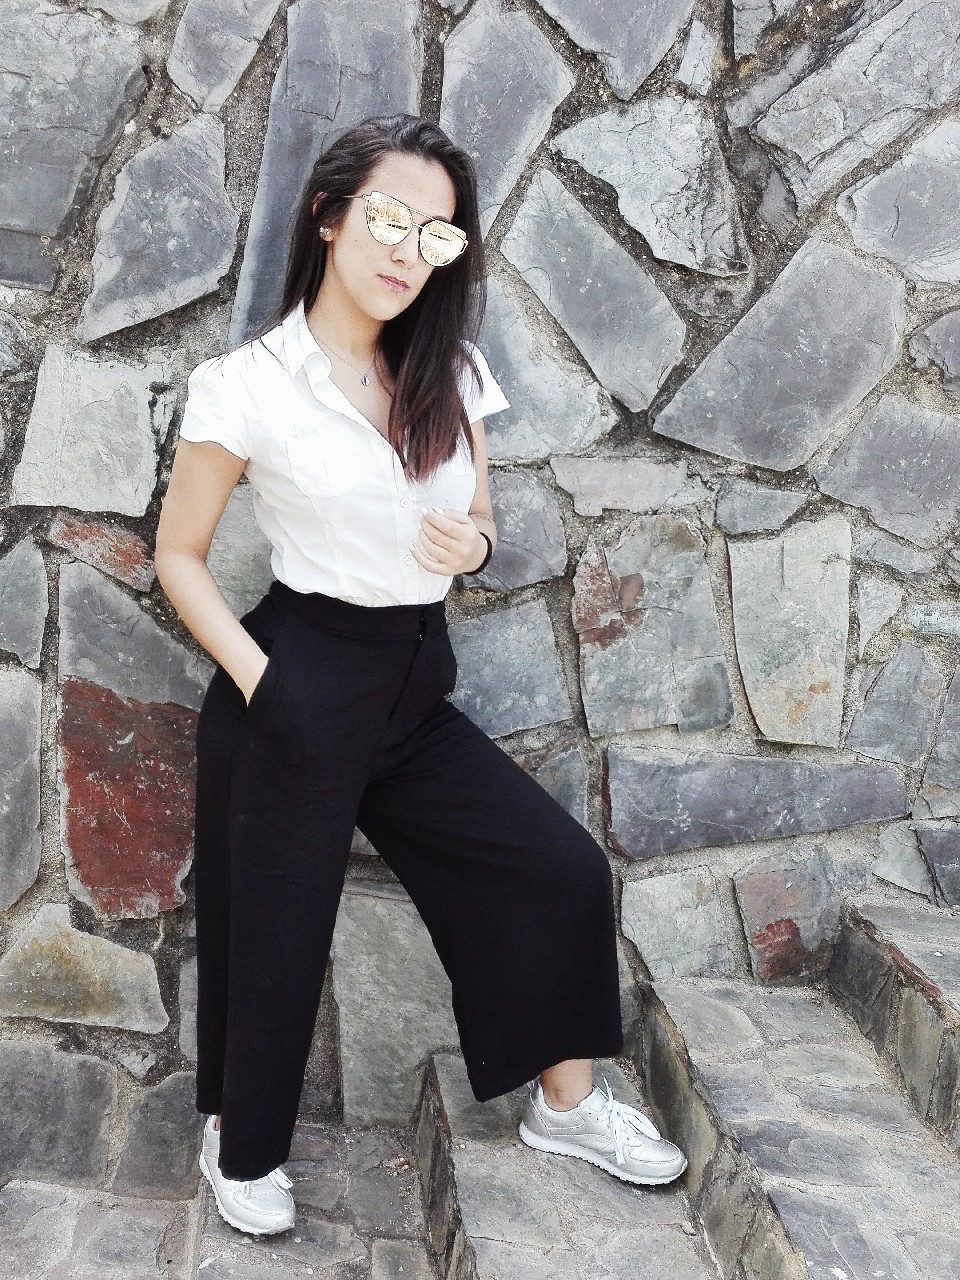 Feeling the Nature | Outfit